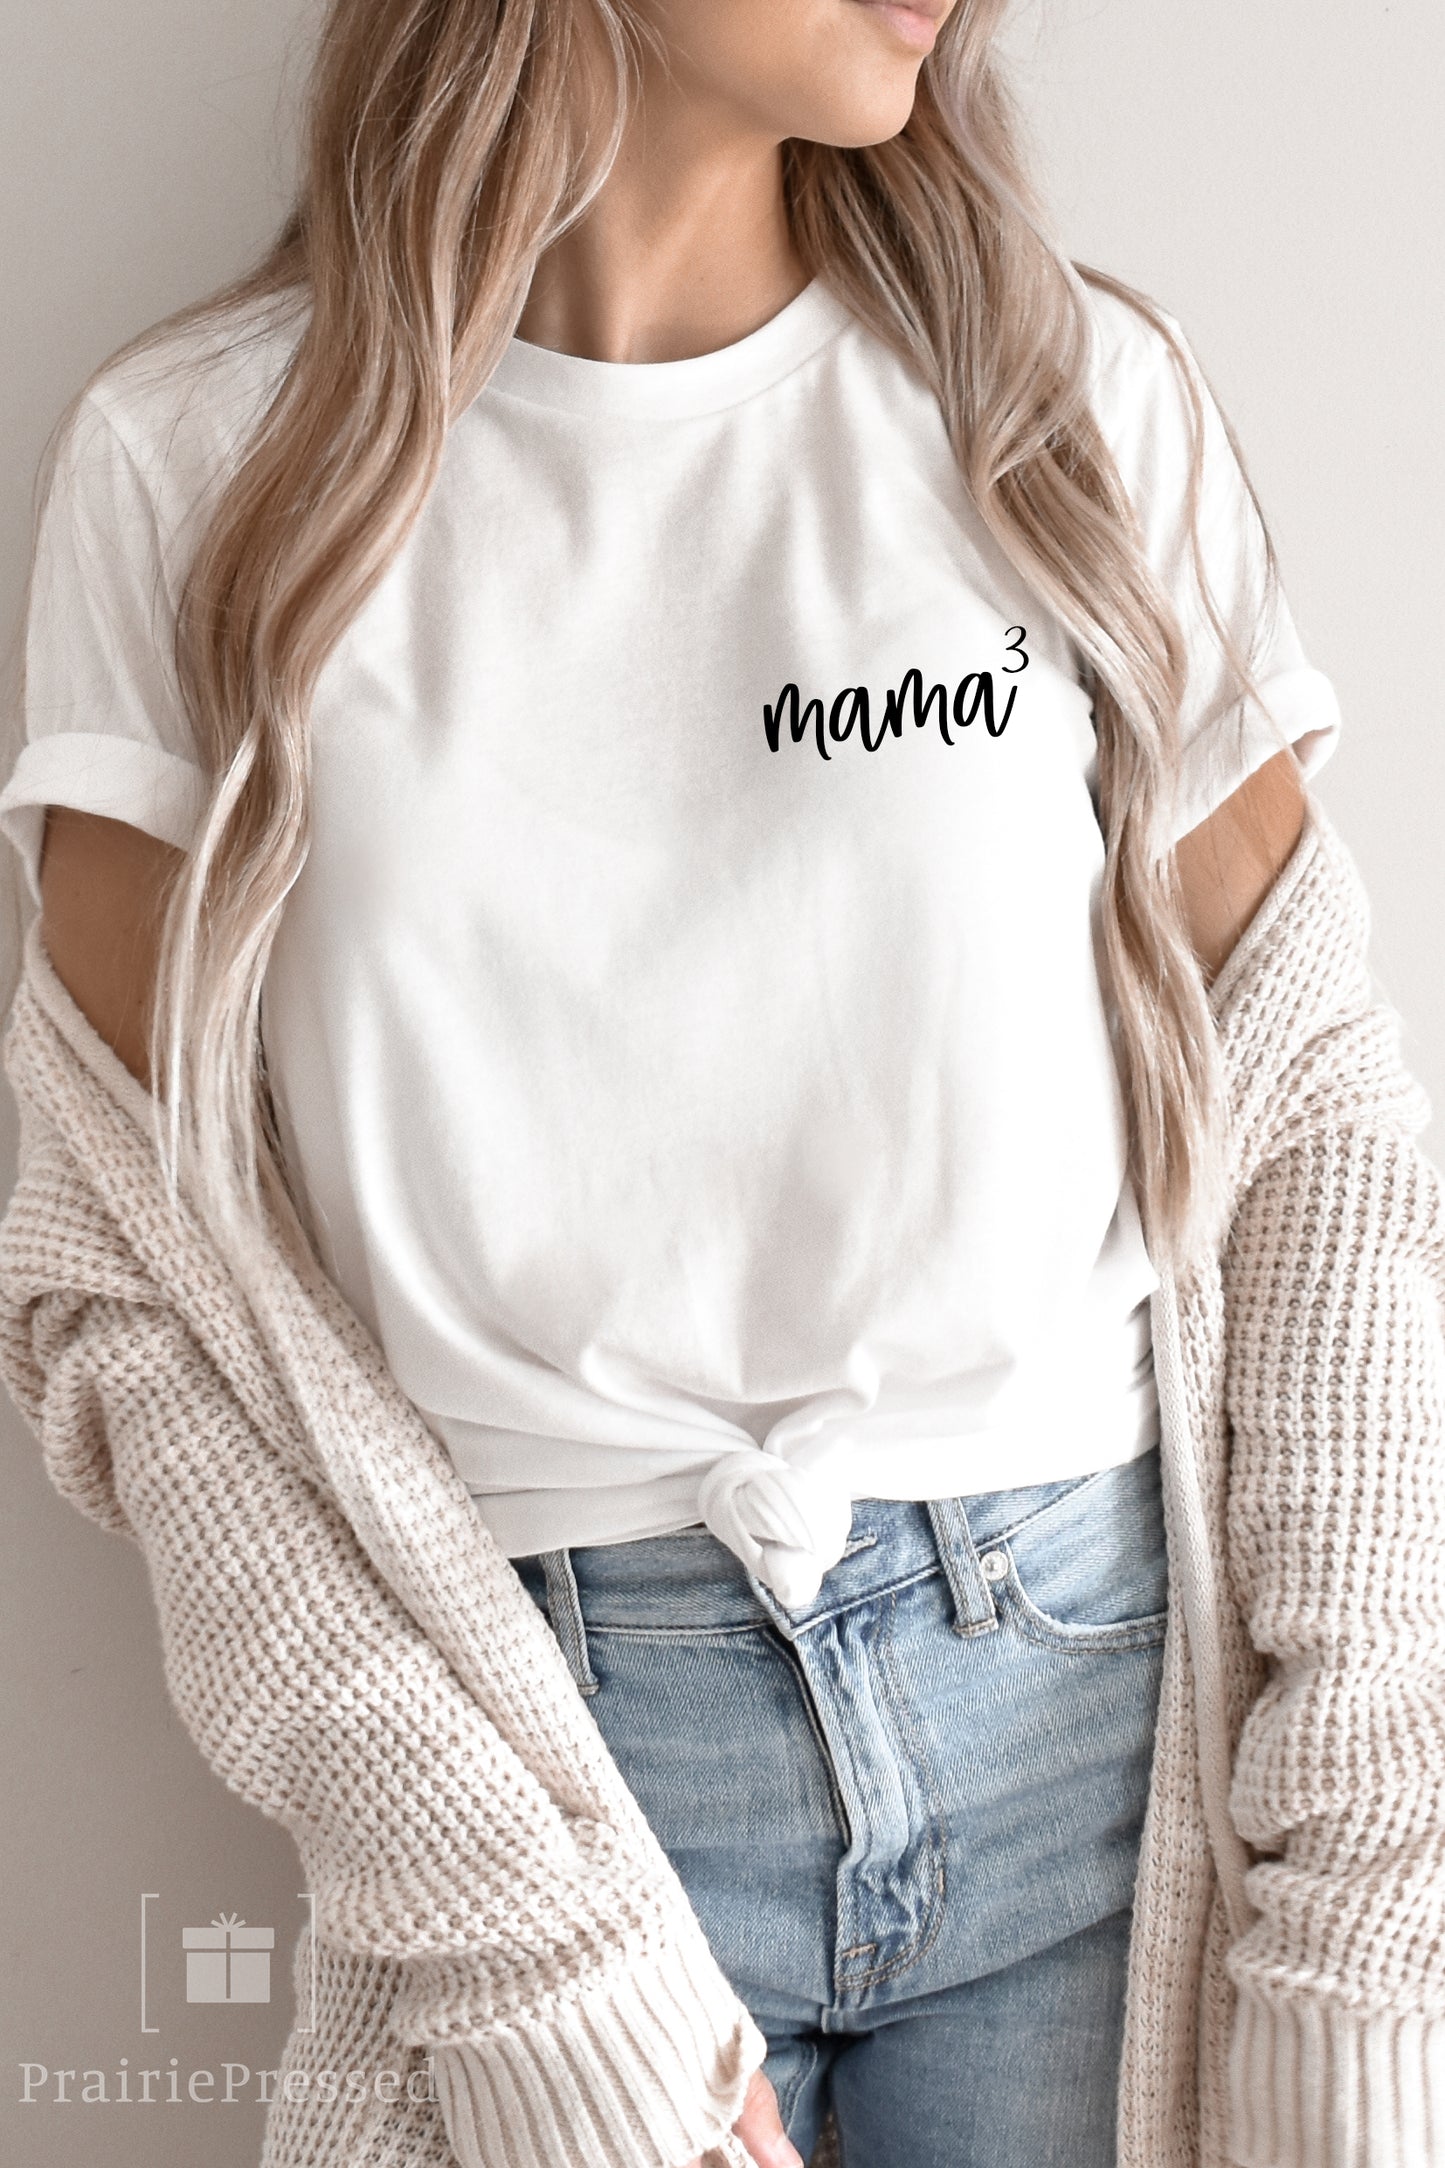 Mama to the Power of TShirt - Customized with the number of Kids